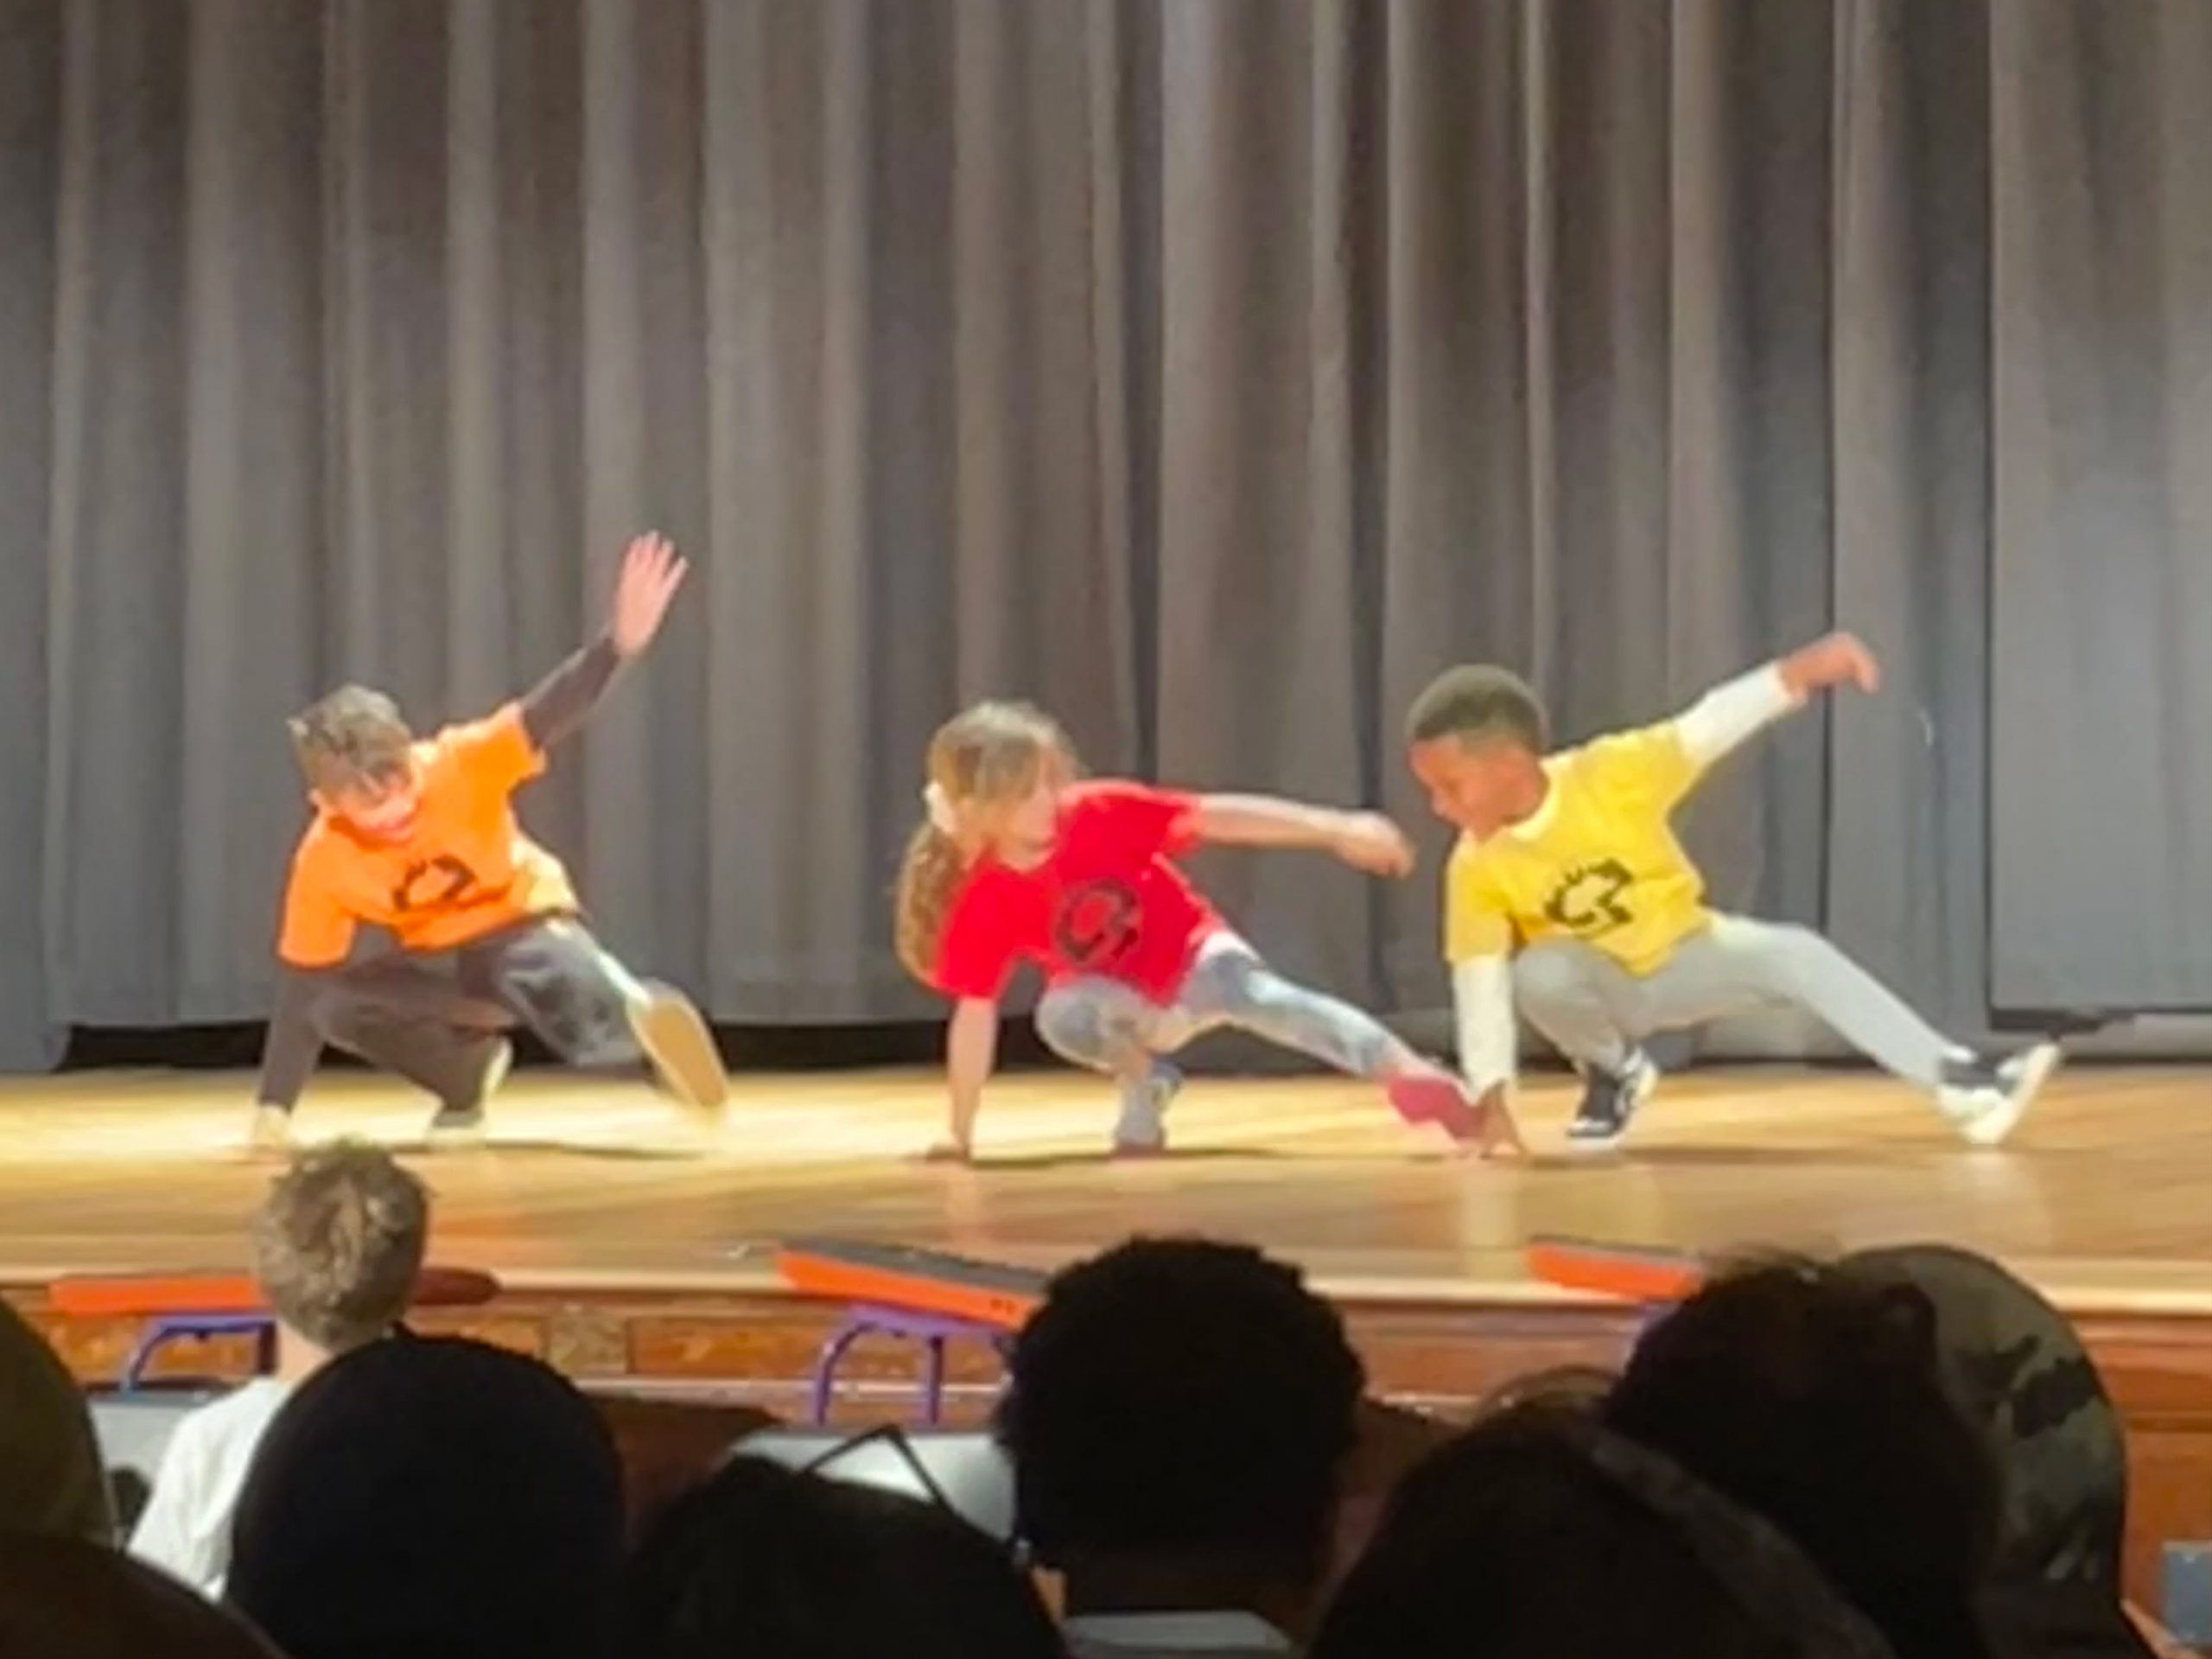 three young students each in orange, red, and yellow t-shirts dance on a stage in front of an audience of family and community members